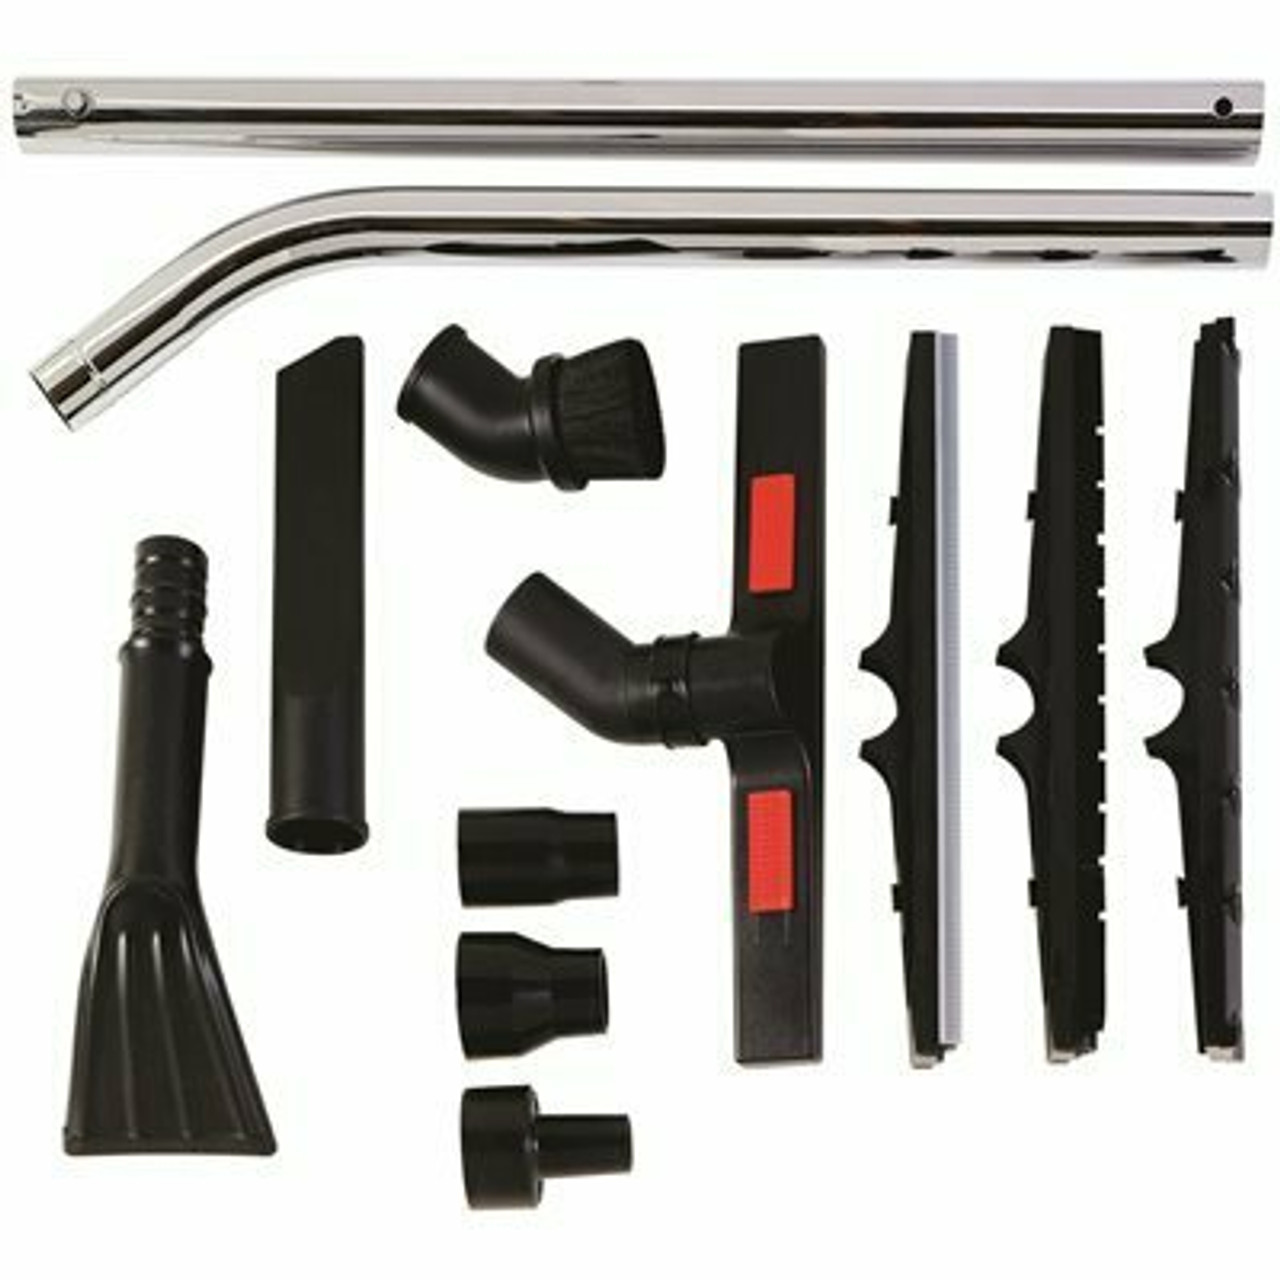 RIDGID 1-7/8 in. and 2-1/2 in. Heavy-Duty Cleaning Accessory Kit for RIDGID Wet/Dry Shop Vacuums